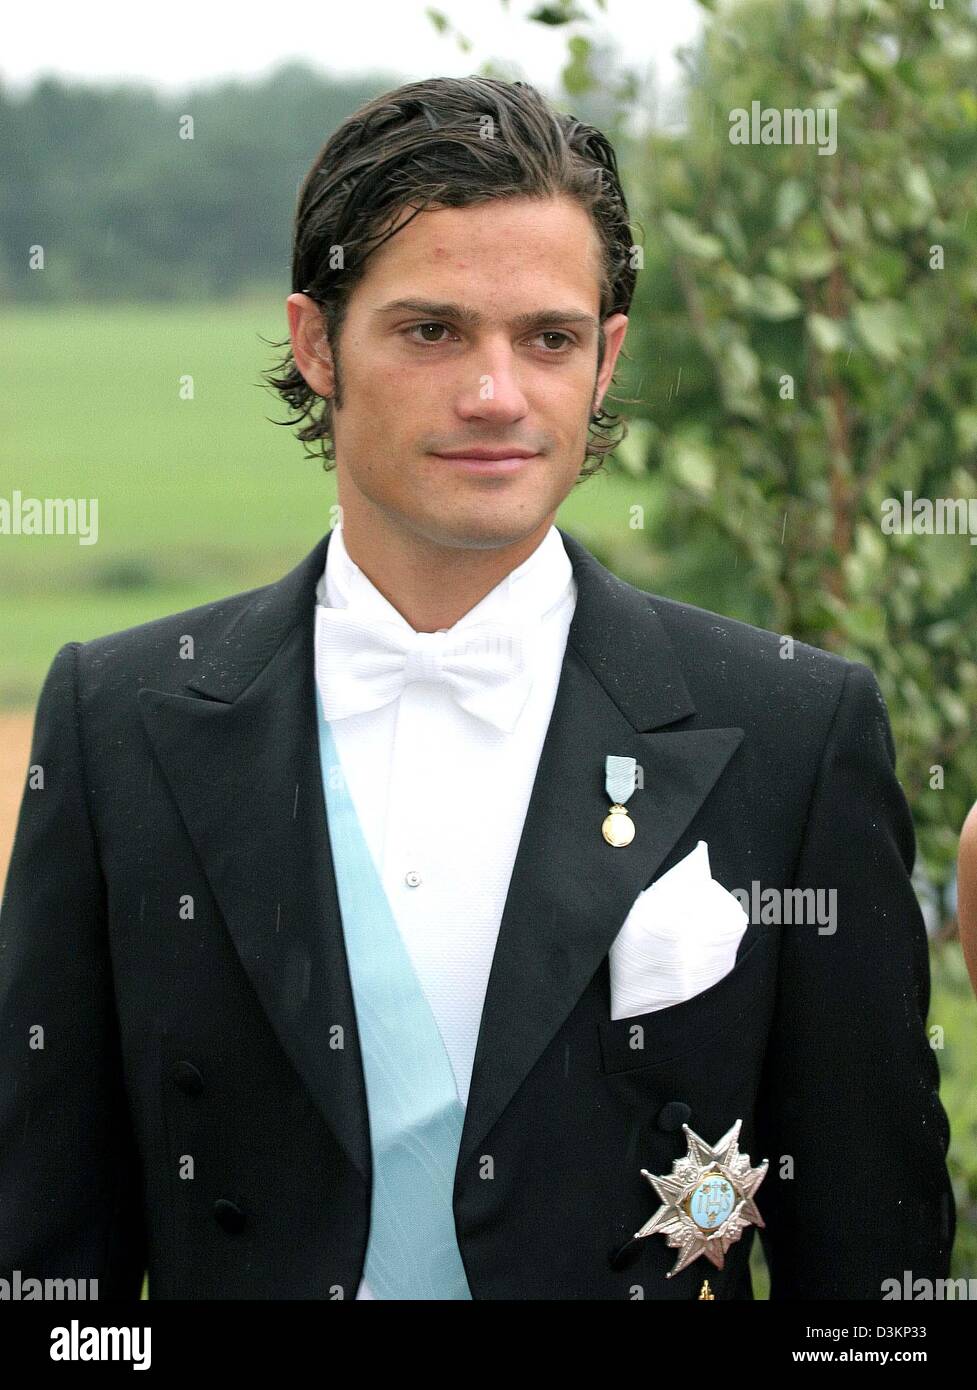 (dpa) - Prince Carl Philip of Sweden smiles at the wedding ceremony of Prince Manuel of Bavaria and Princess Anna zu Sayn-Wittgenstein-Berleburg in Stigtomta, Sweden, 6 August 2005. Photo: Albert Nieboer (NETHERLANDS OUT) Stock Photo